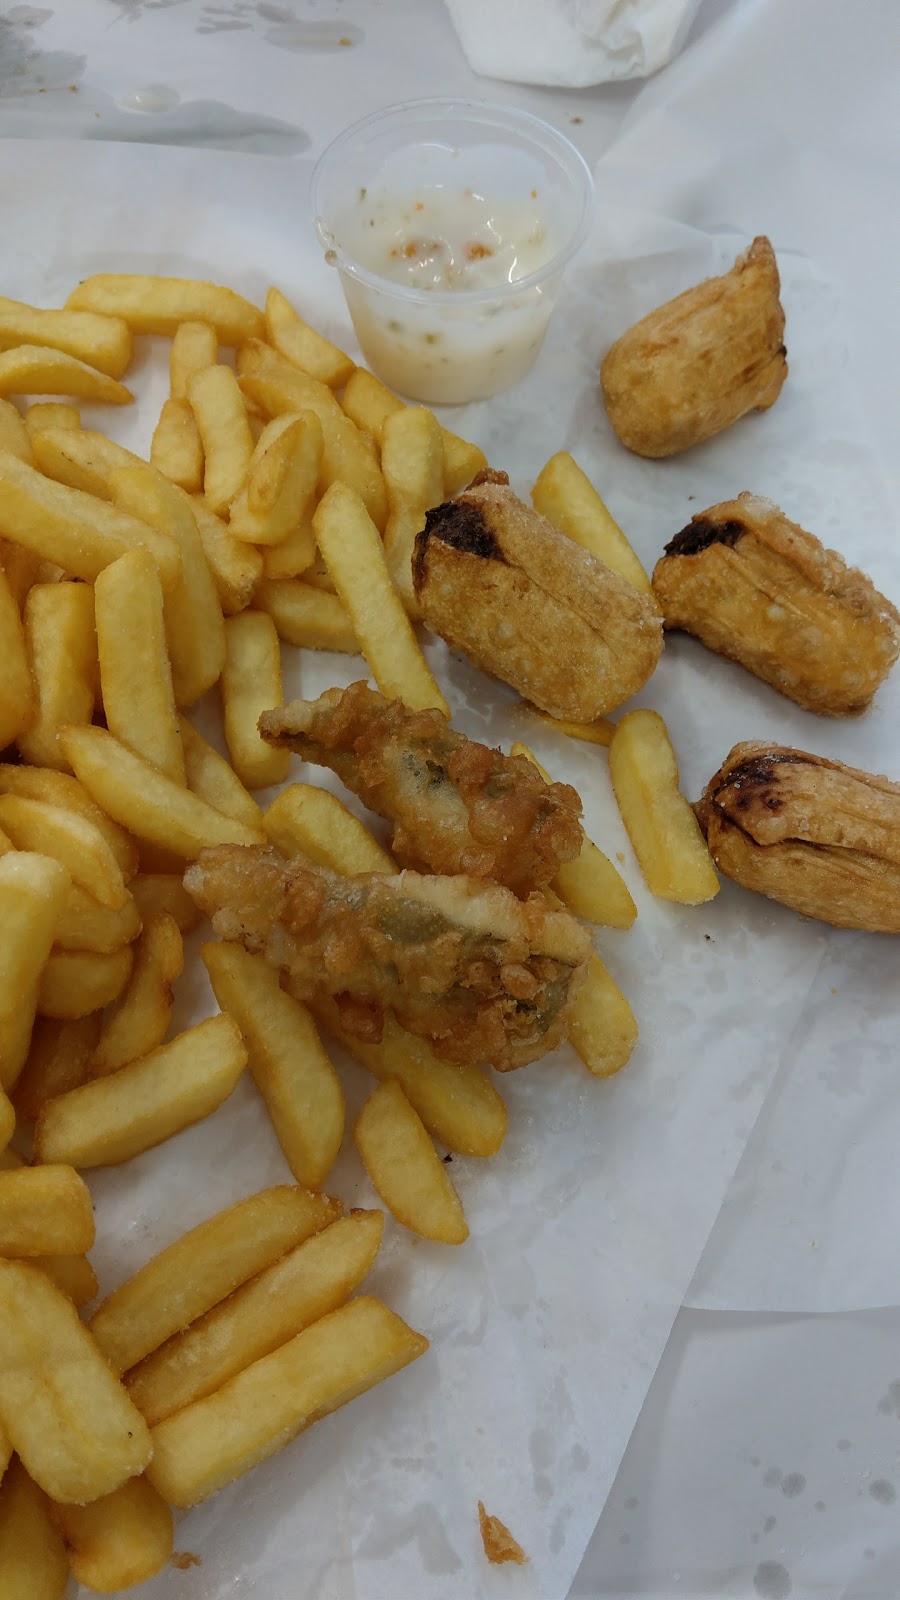 Awesome Fish & Chips | meal takeaway | 337 Esplanade, Lakes Entrance VIC 3909, Australia | 0351553166 OR +61 3 5155 3166